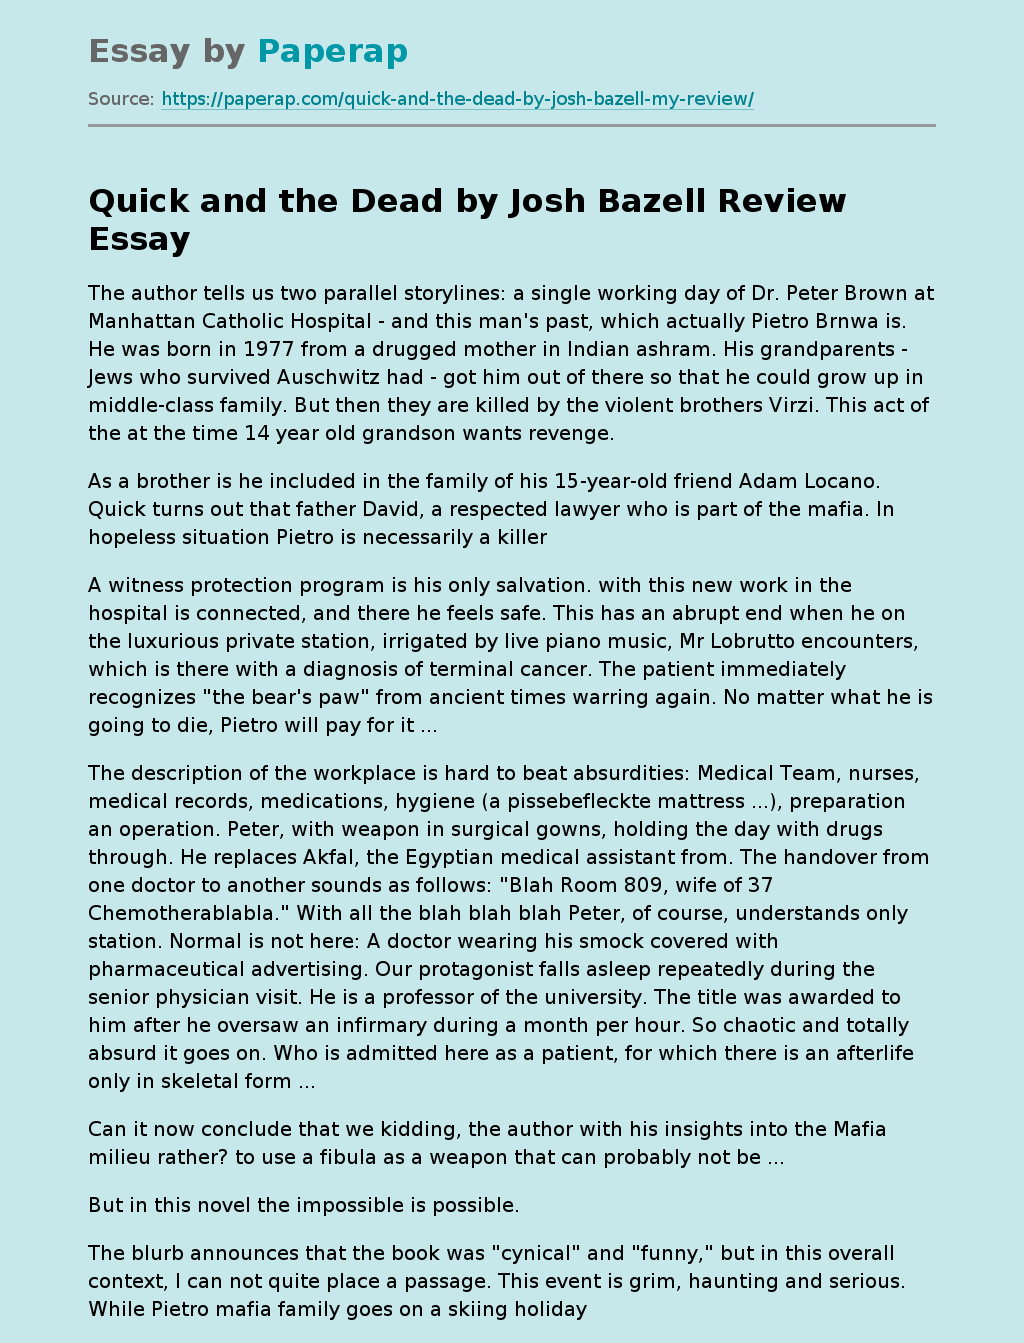 "Quick and the Dead" by Josh Bazell